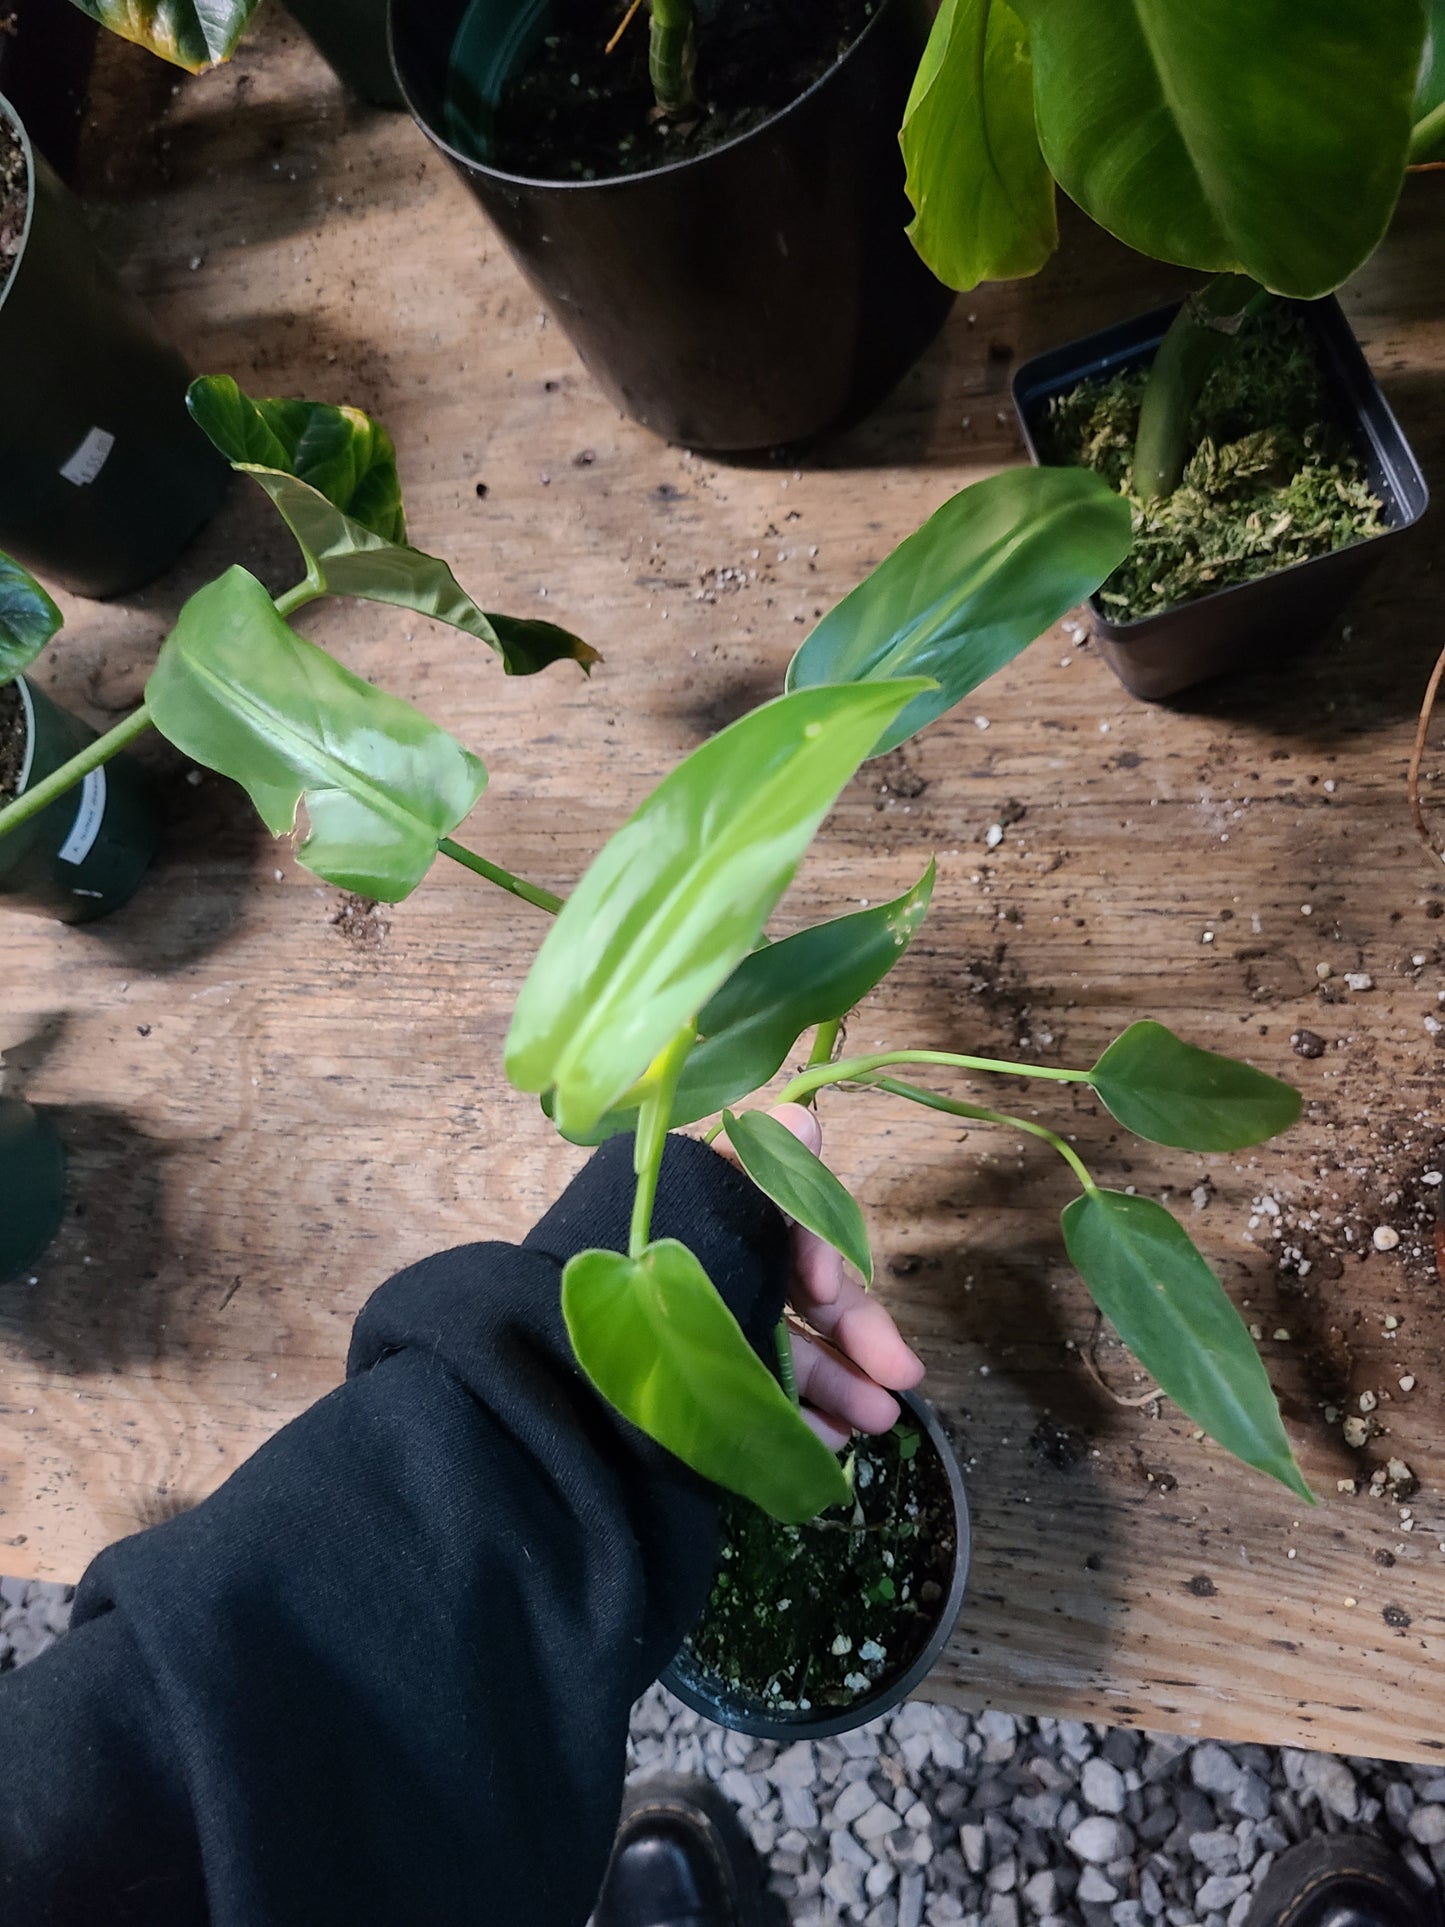 Philodendron Oxapapense